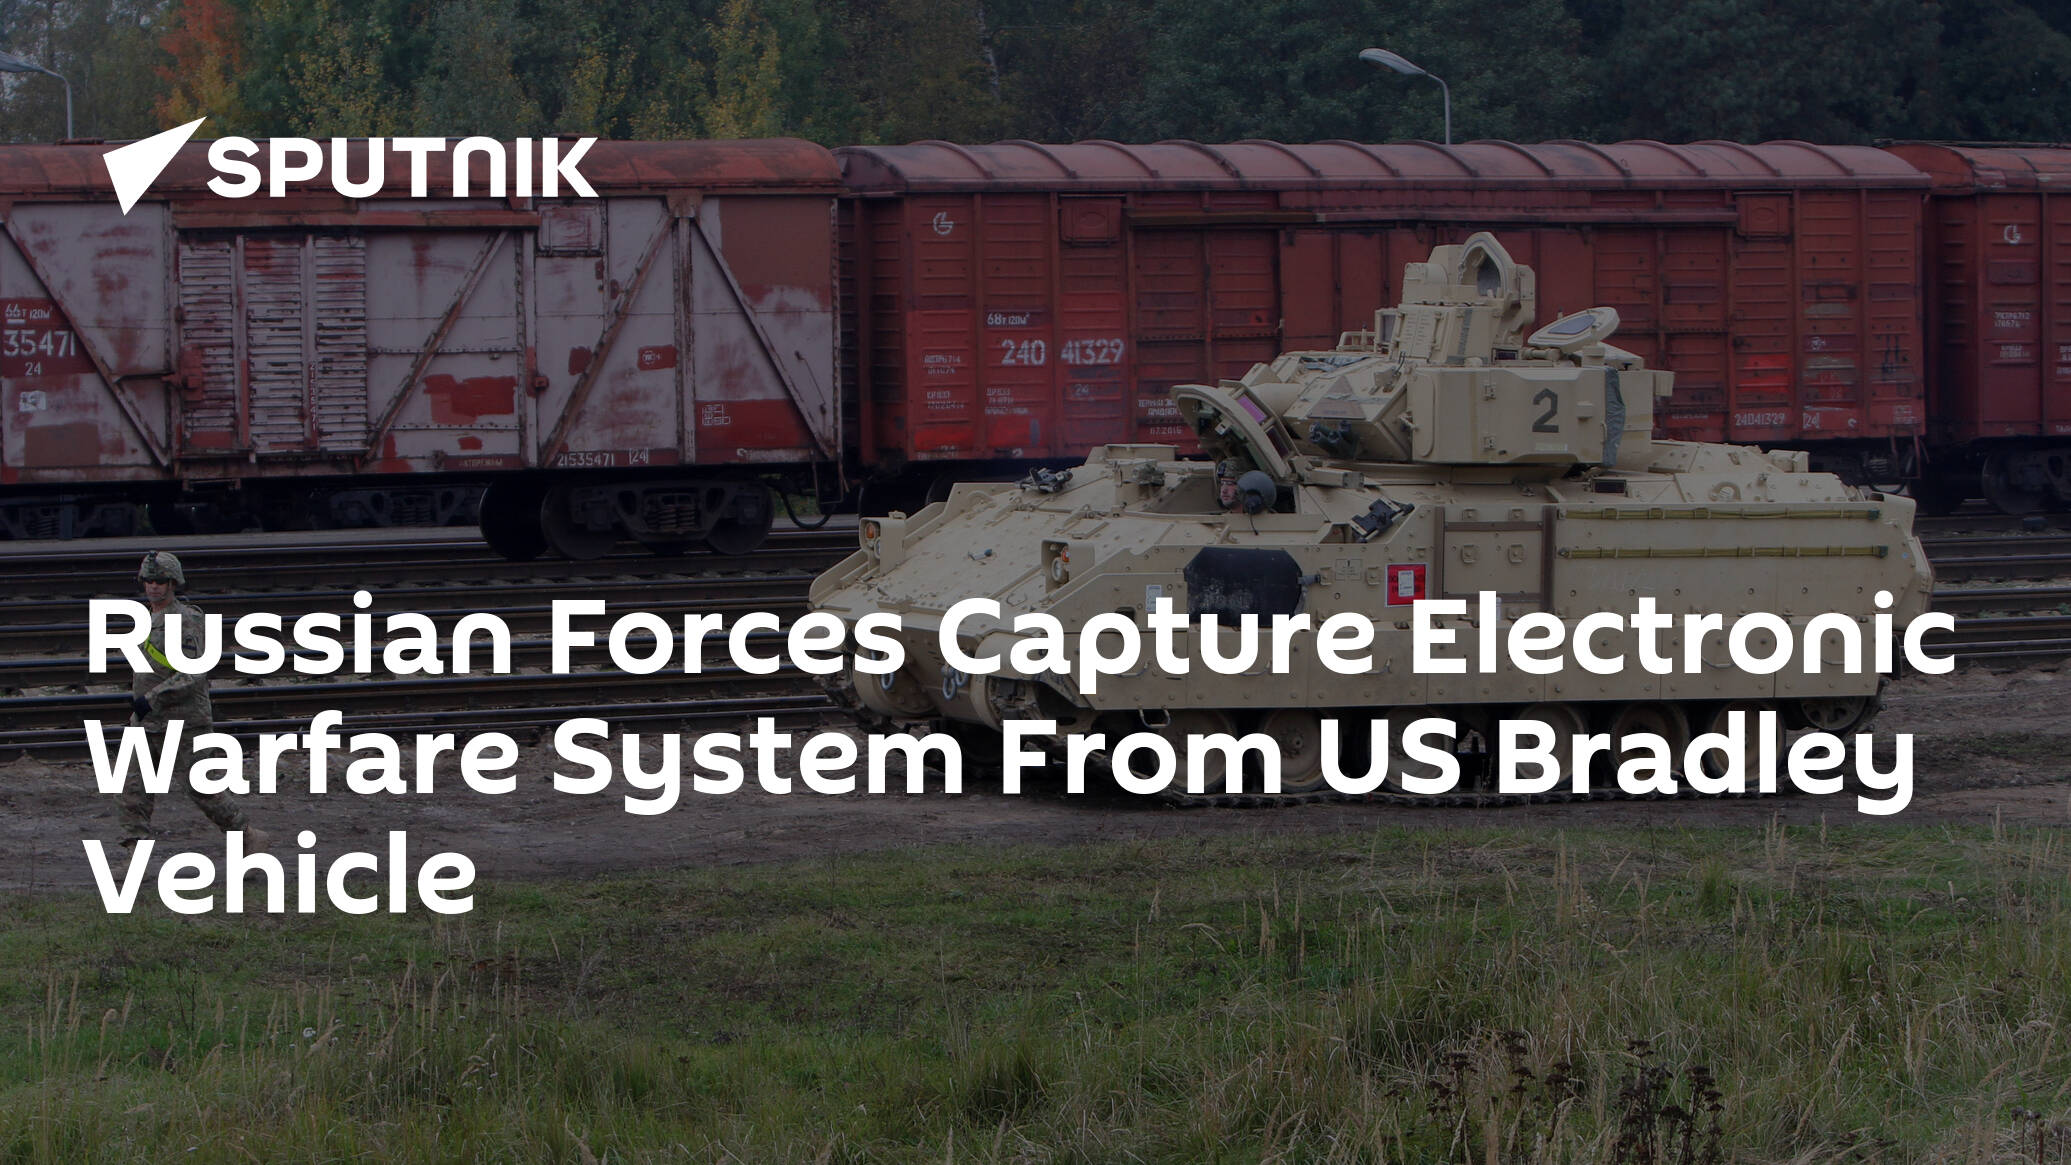 Russian Forces Capture Electronic Warfare System From US Bradley Vehicle